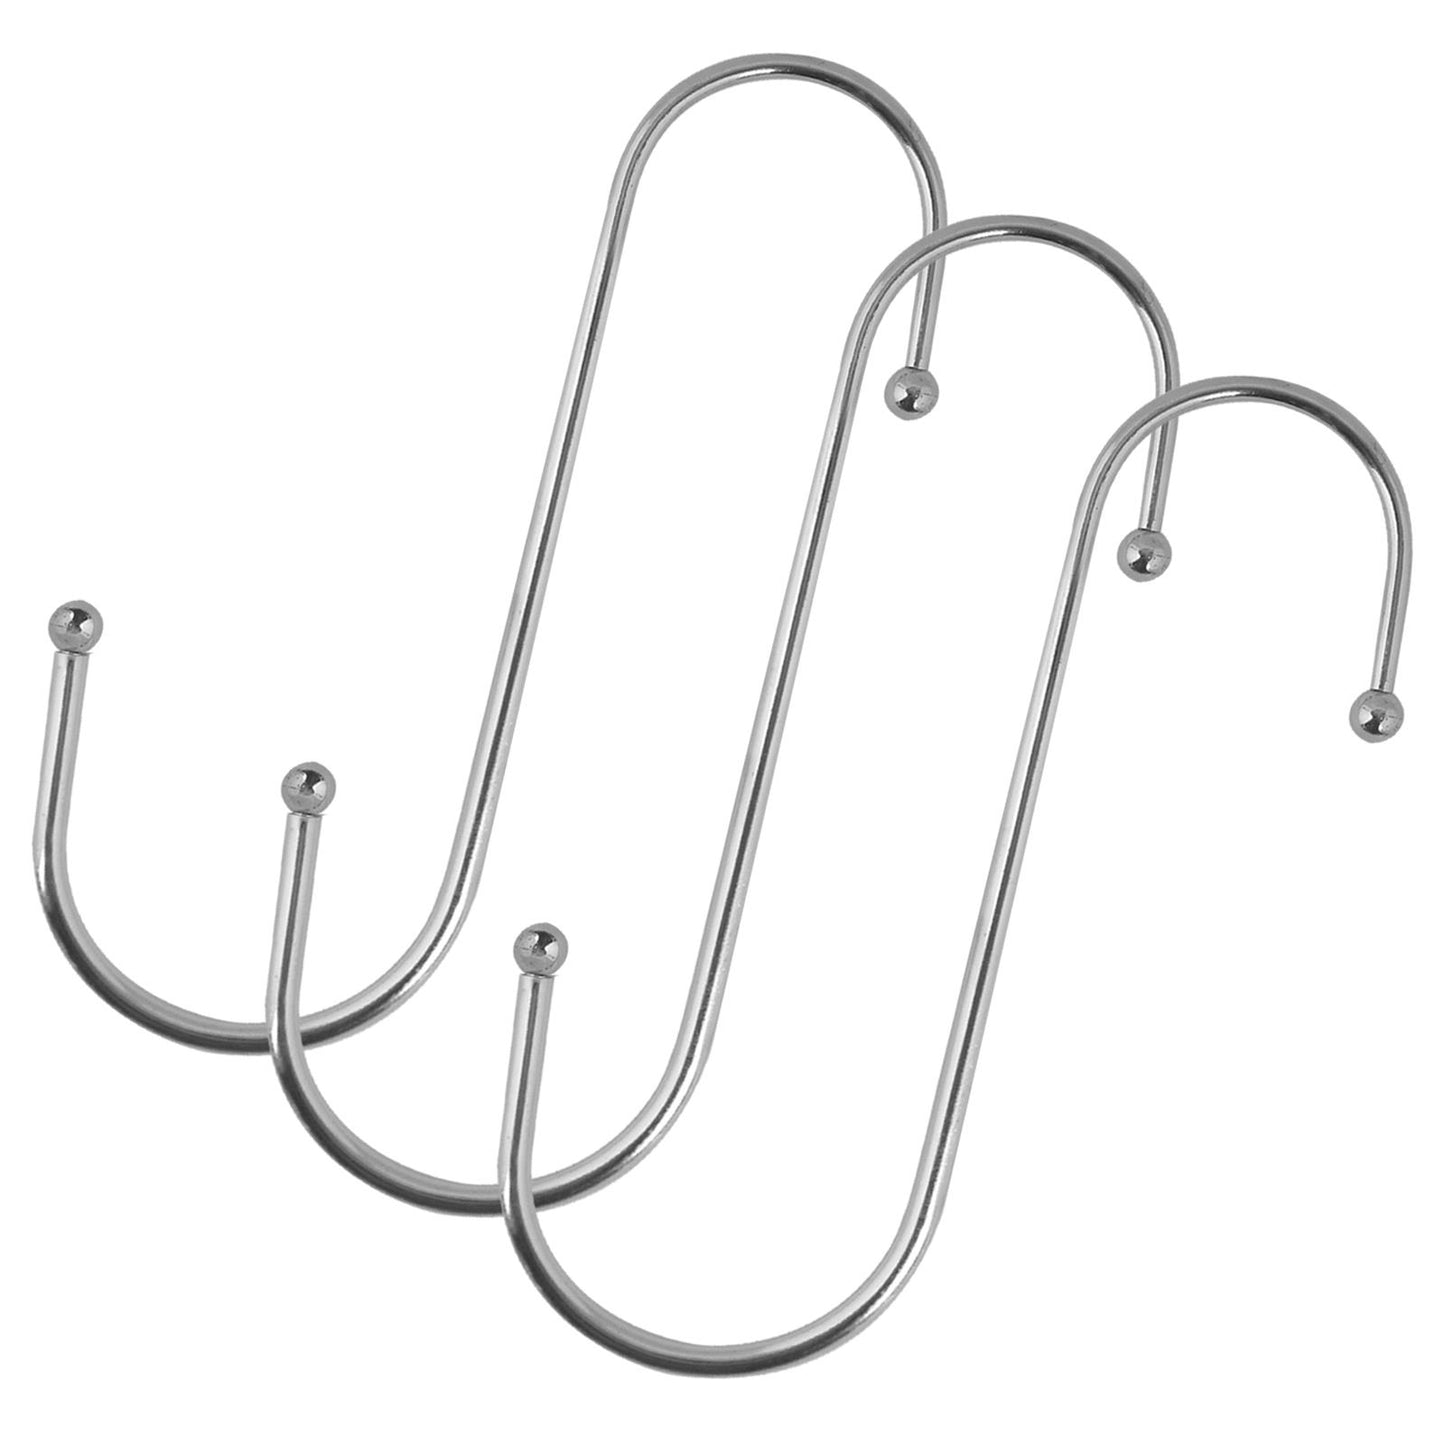 Set Of 3 Stainless Steel S-Shaped Hooks For Kitchen Clothes Or Garden